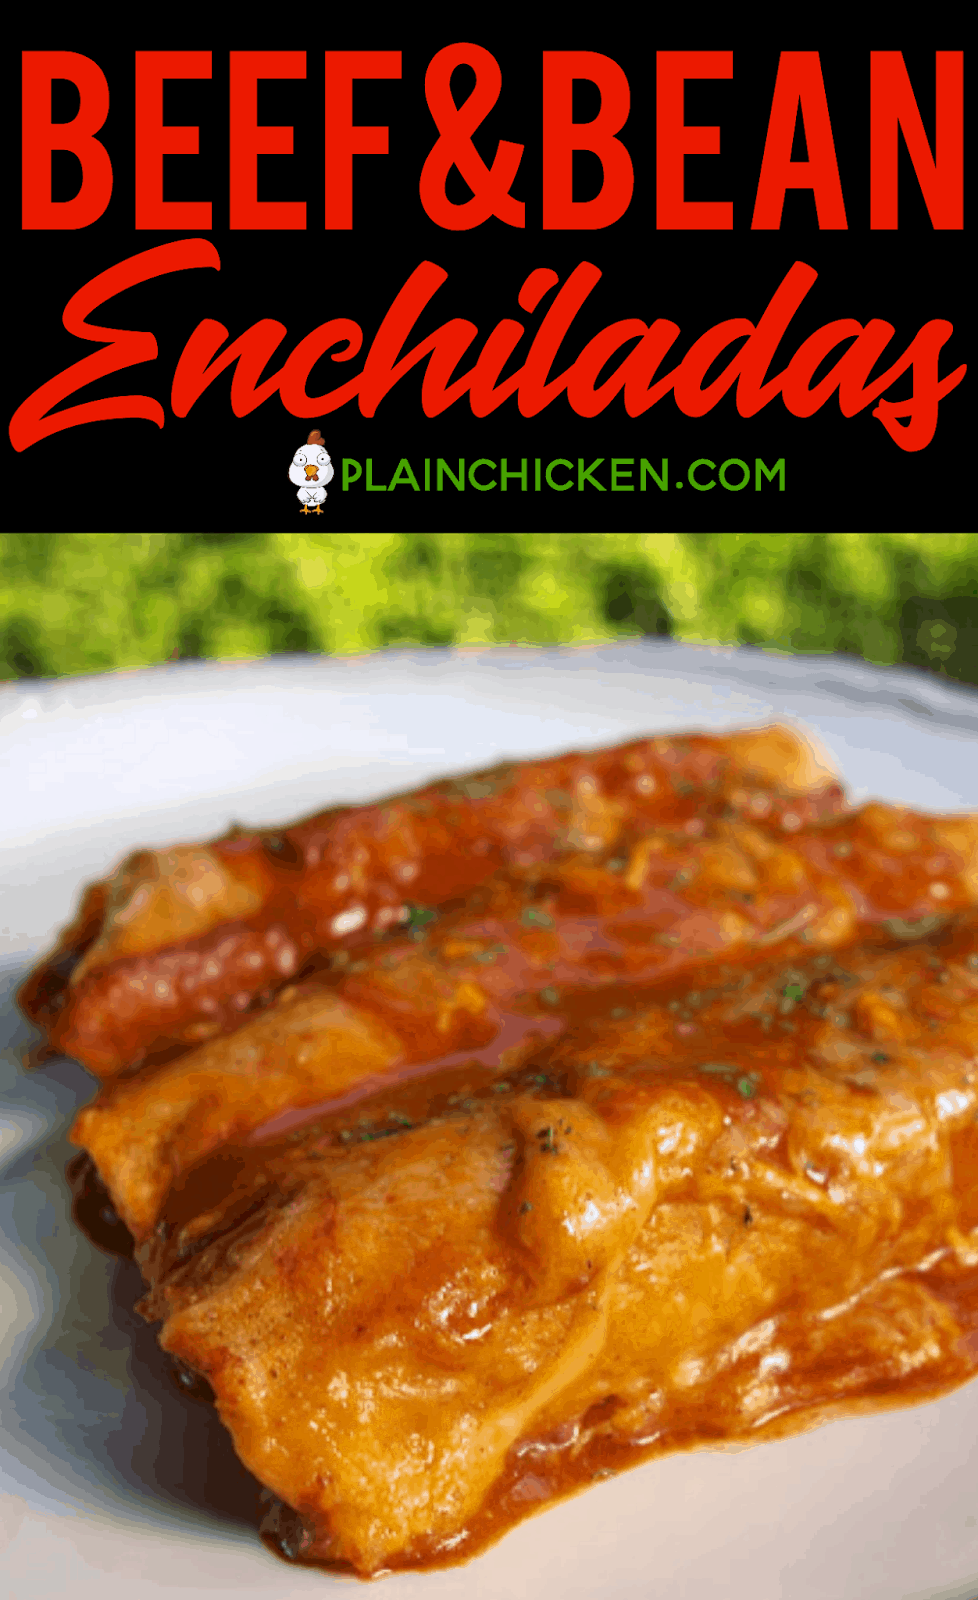 Beef and Bean Enchiladas - quick and easy weeknight meal!! Corn tortillas filled with beef and cheese and topped with enchilada sauce. Ground beef, onions, refried beans, taco seasoning, enchilada sauce, corn tortillas and cheddar cheese. Can make ahead of time and freeze for later! #mexican #enchiladas #freezermeal #easydinnerrecipe